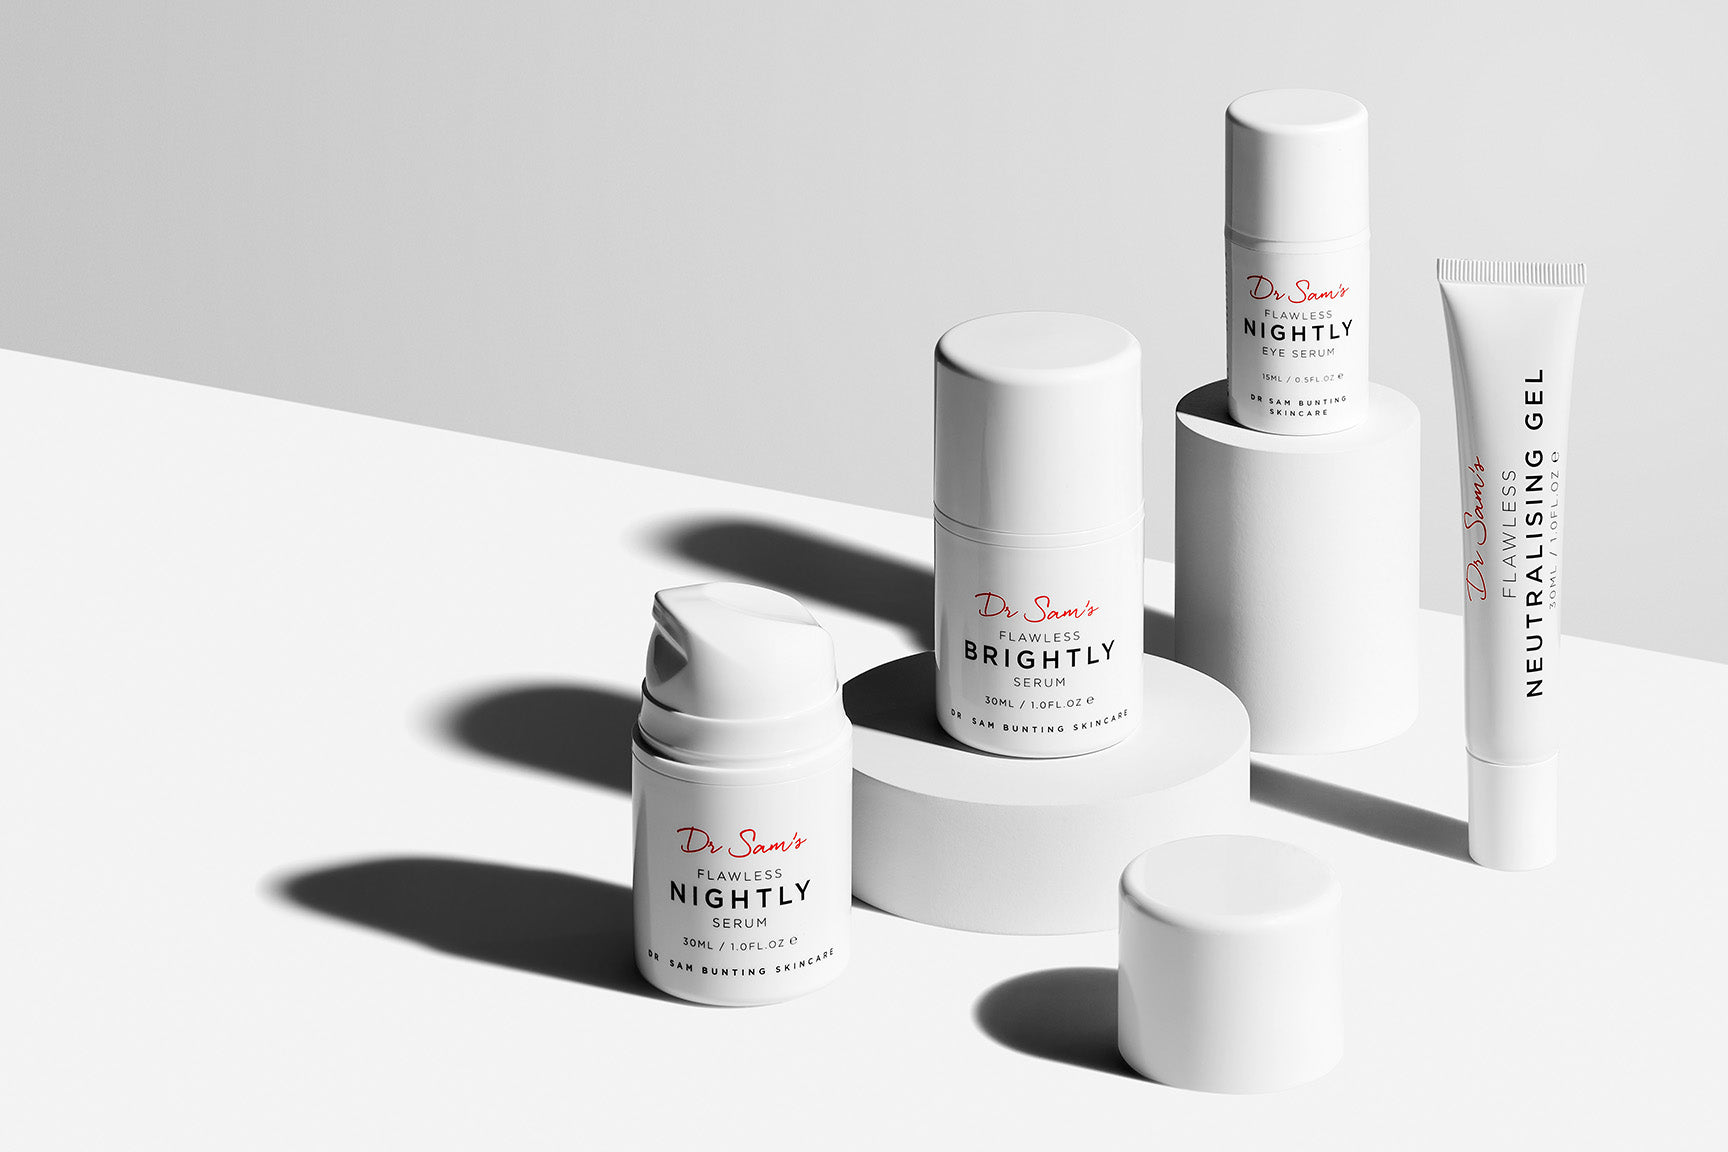 Dr Sam's Serums featuring Flawless Nightly 2% Retinoid Serum, Flawless Brightly Serum, Flawless Nightly Eye 2% Retinoid Serum, Flawless Neutralising Gel